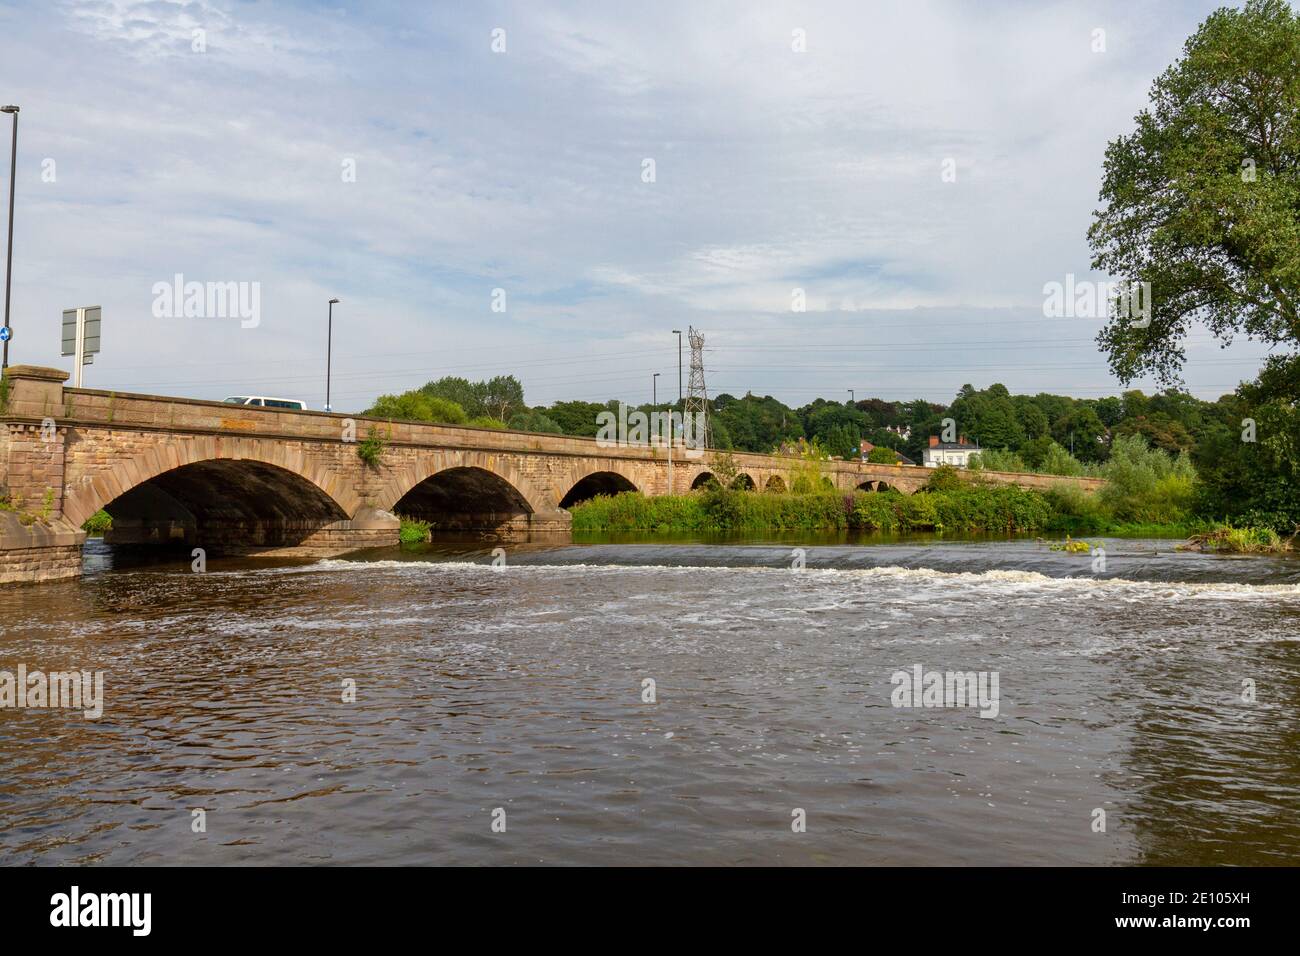 View across the Trent Bridge (c.1864) and the River Trent, Burton upon Trent, (Burton-on-Trent or Burton), a market town in Staffordshire, UK. Stock Photo